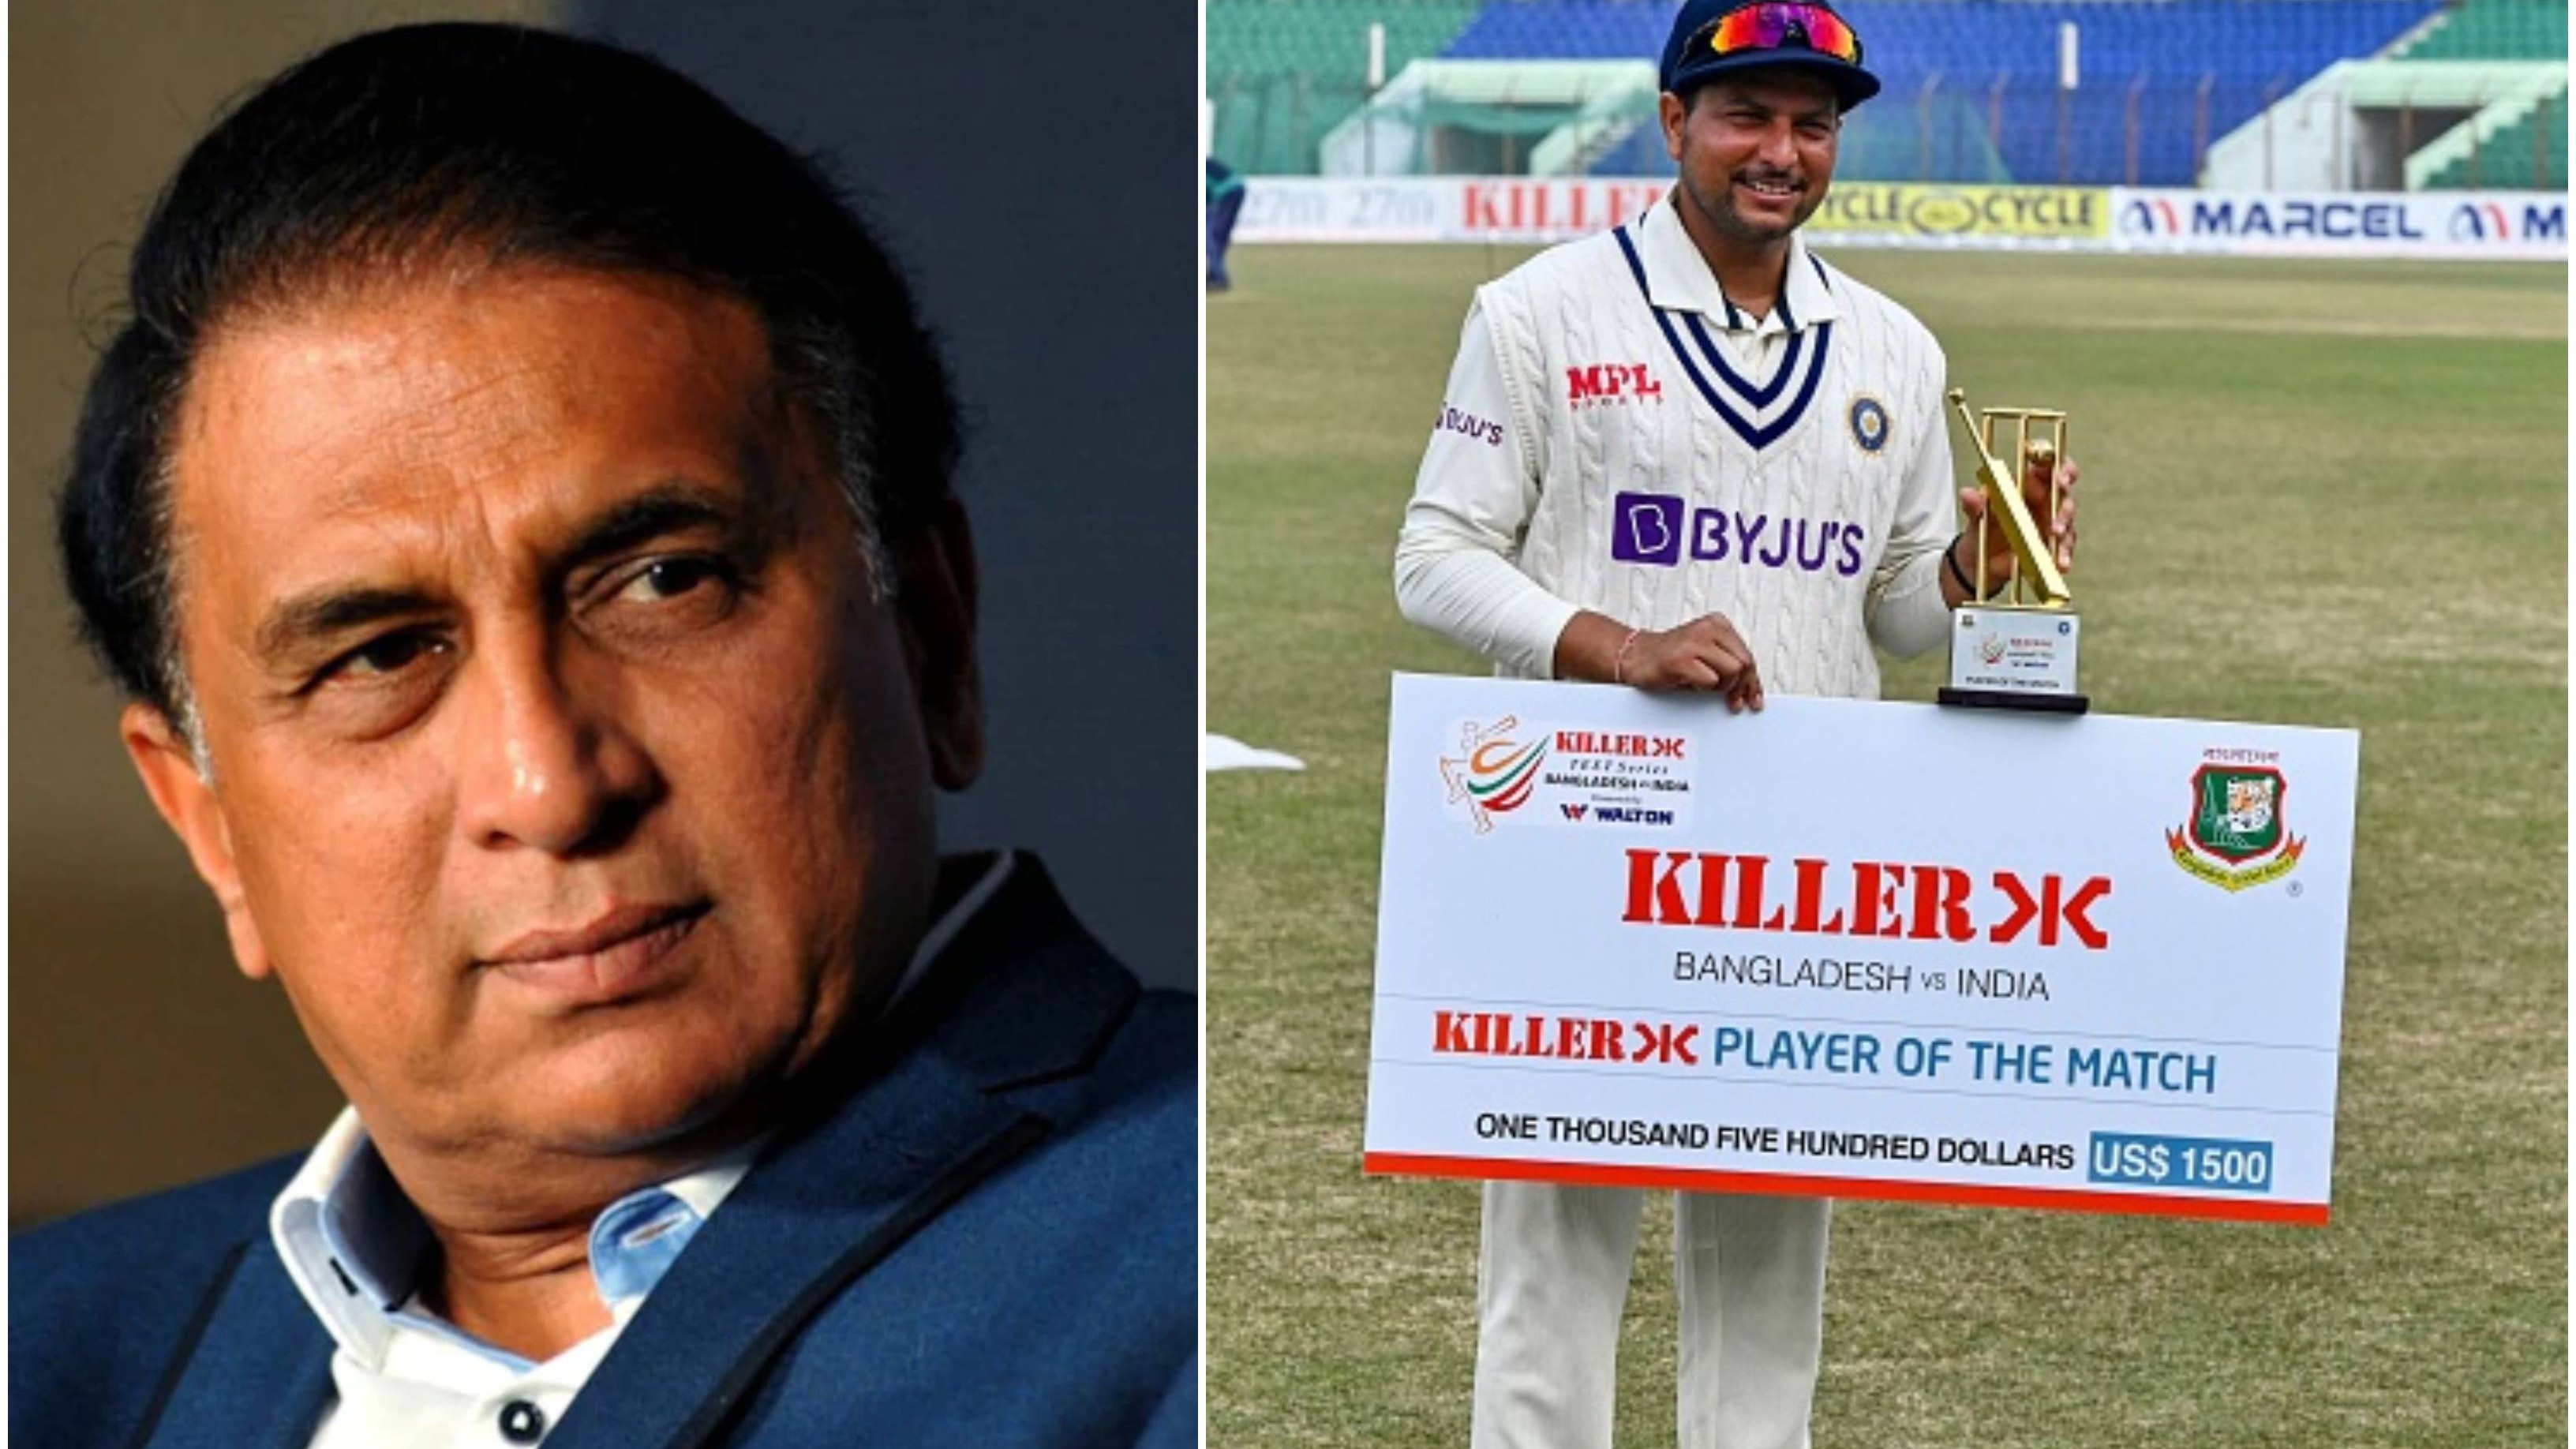 BAN v IND 2022: “That is unbelievable,” Gavaskar shocked over Kuldeep Yadav’s exclusion from India’s XI for 2nd Test